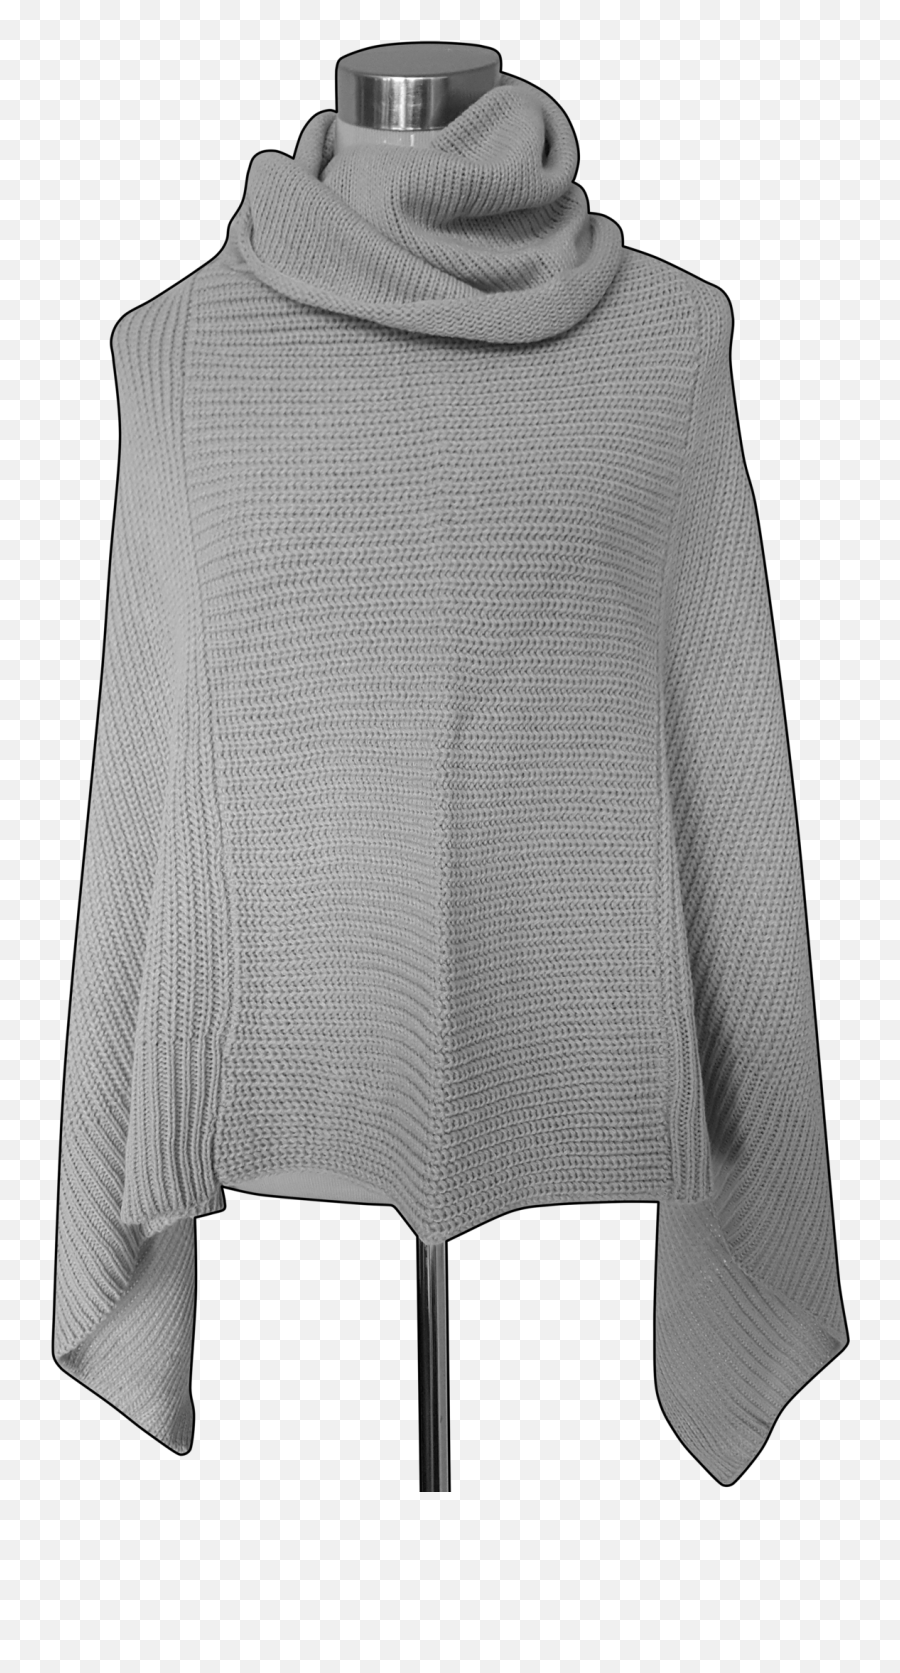 Download Knit Poncho - Sweater Full Size Png Image Pngkit Sweater,Poncho Png